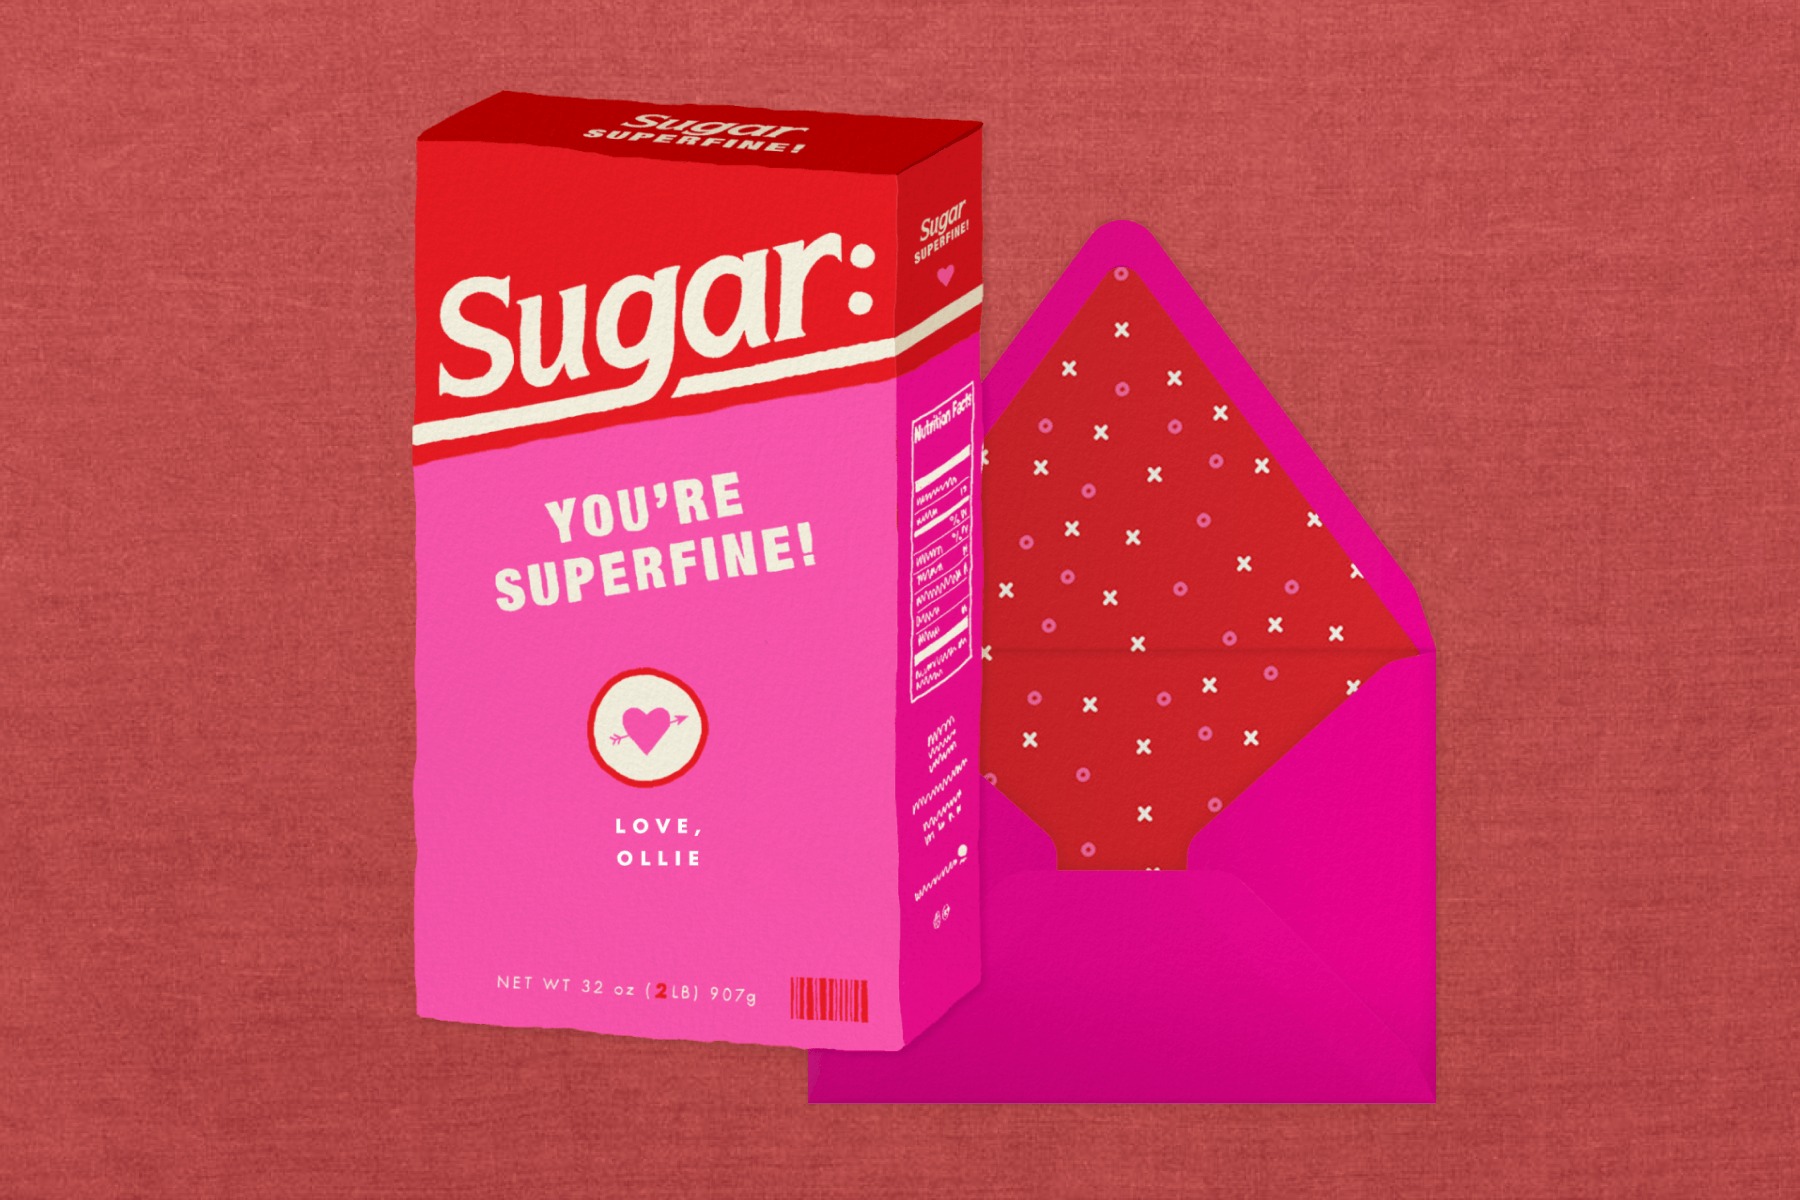 A pink and red card looks like a box of sugar and reads ‘sugar: you’re superfine!’